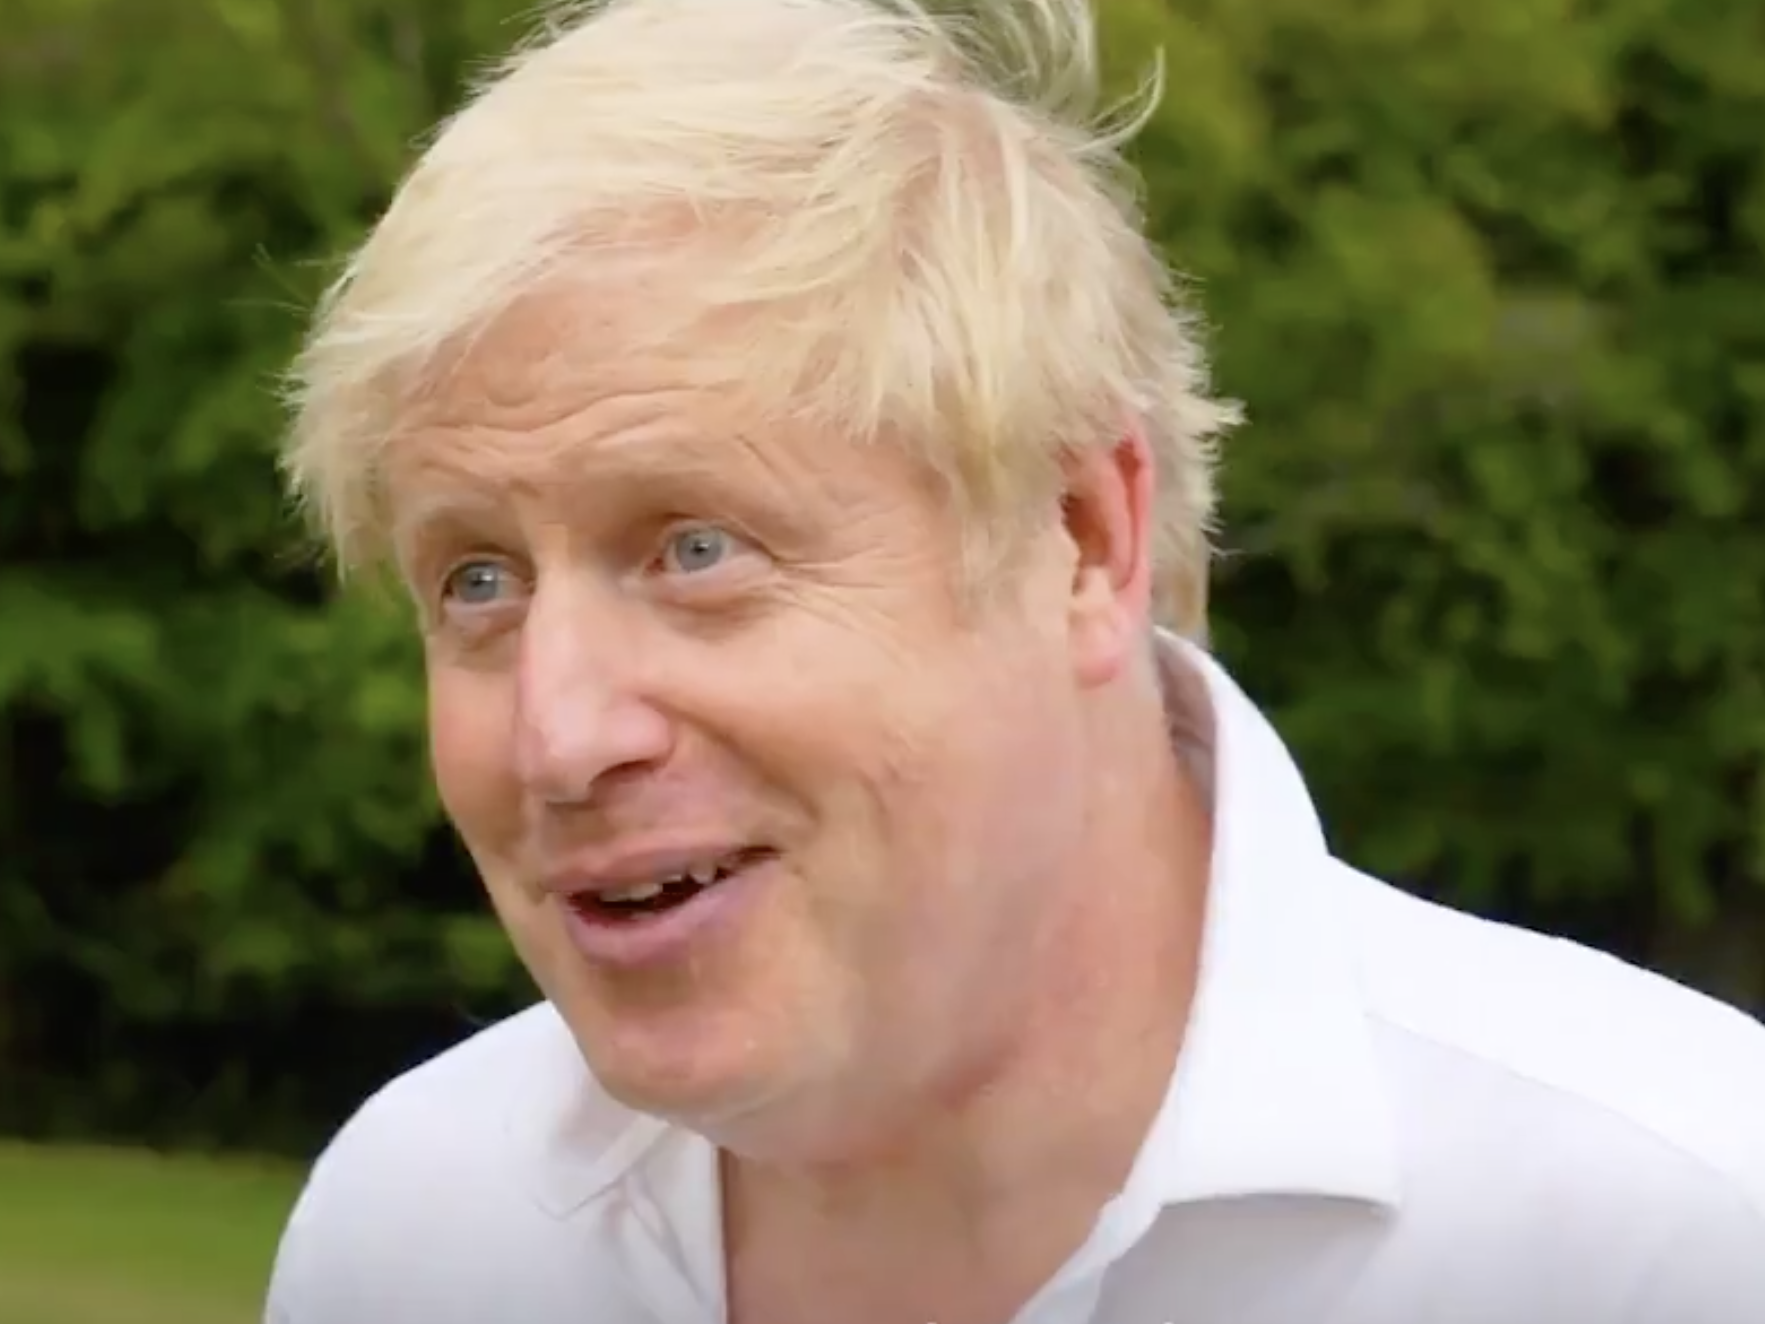 Boris Johnson news – live: PM says he was &apos;too fat&apos; before illness, as No 10 announces crackdown on junk food ads and deals thumbnail